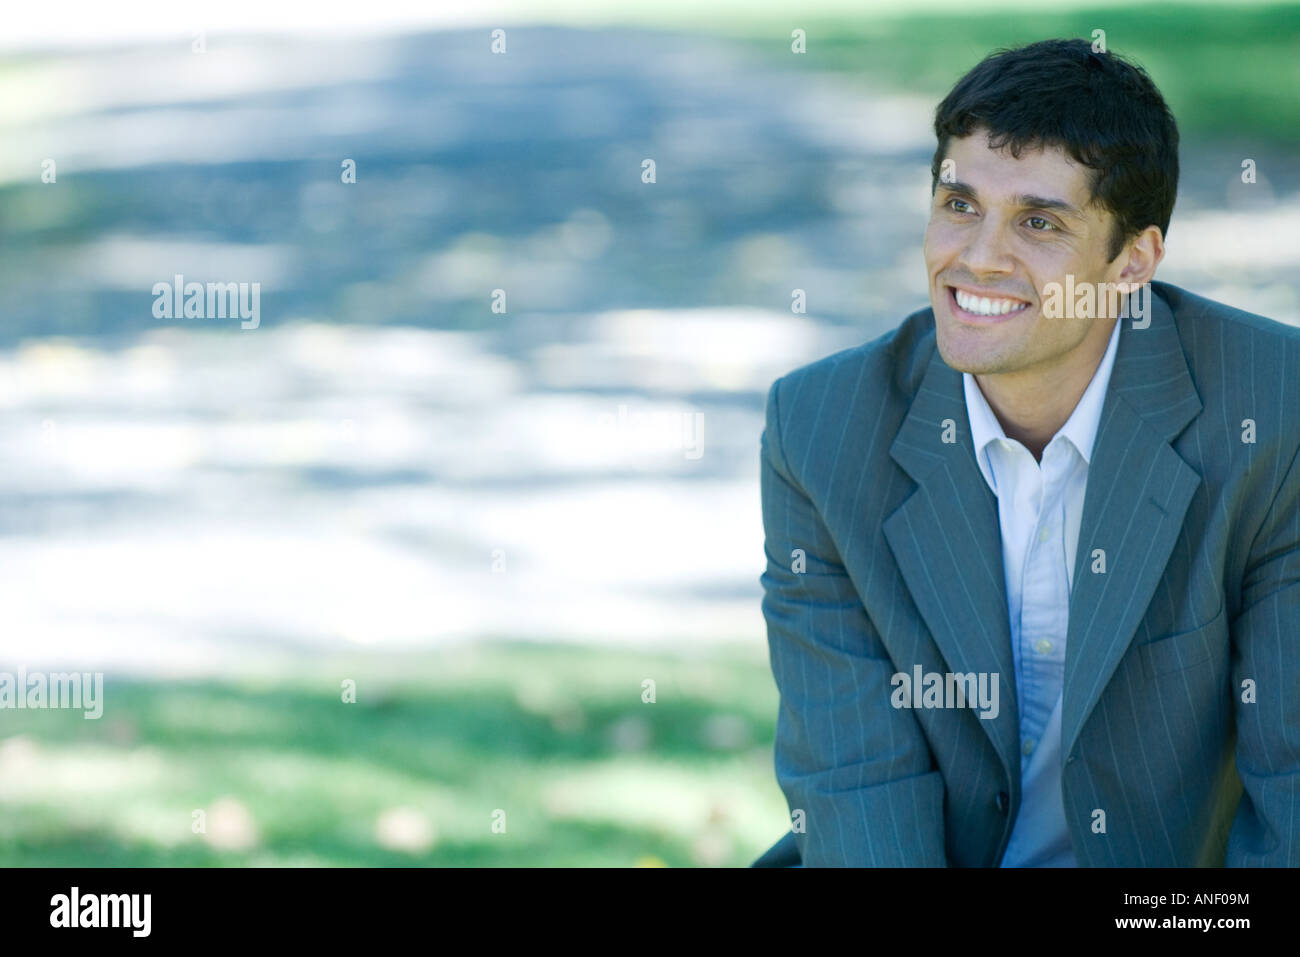 Businessman in park, smiling Stock Photo